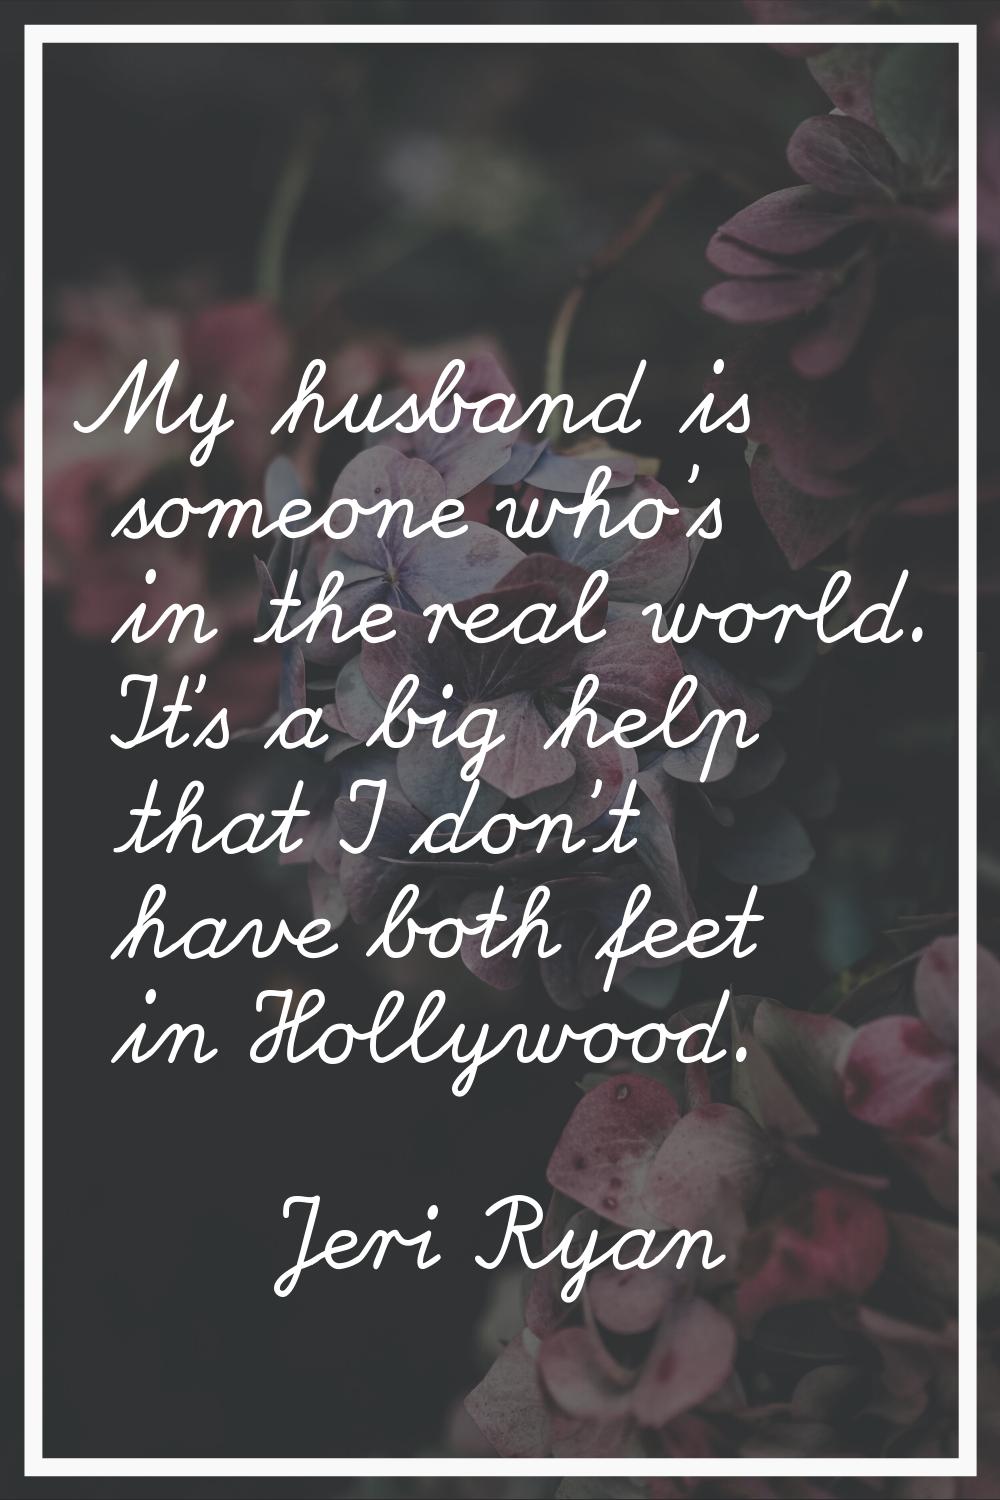 My husband is someone who's in the real world. It's a big help that I don't have both feet in Holly